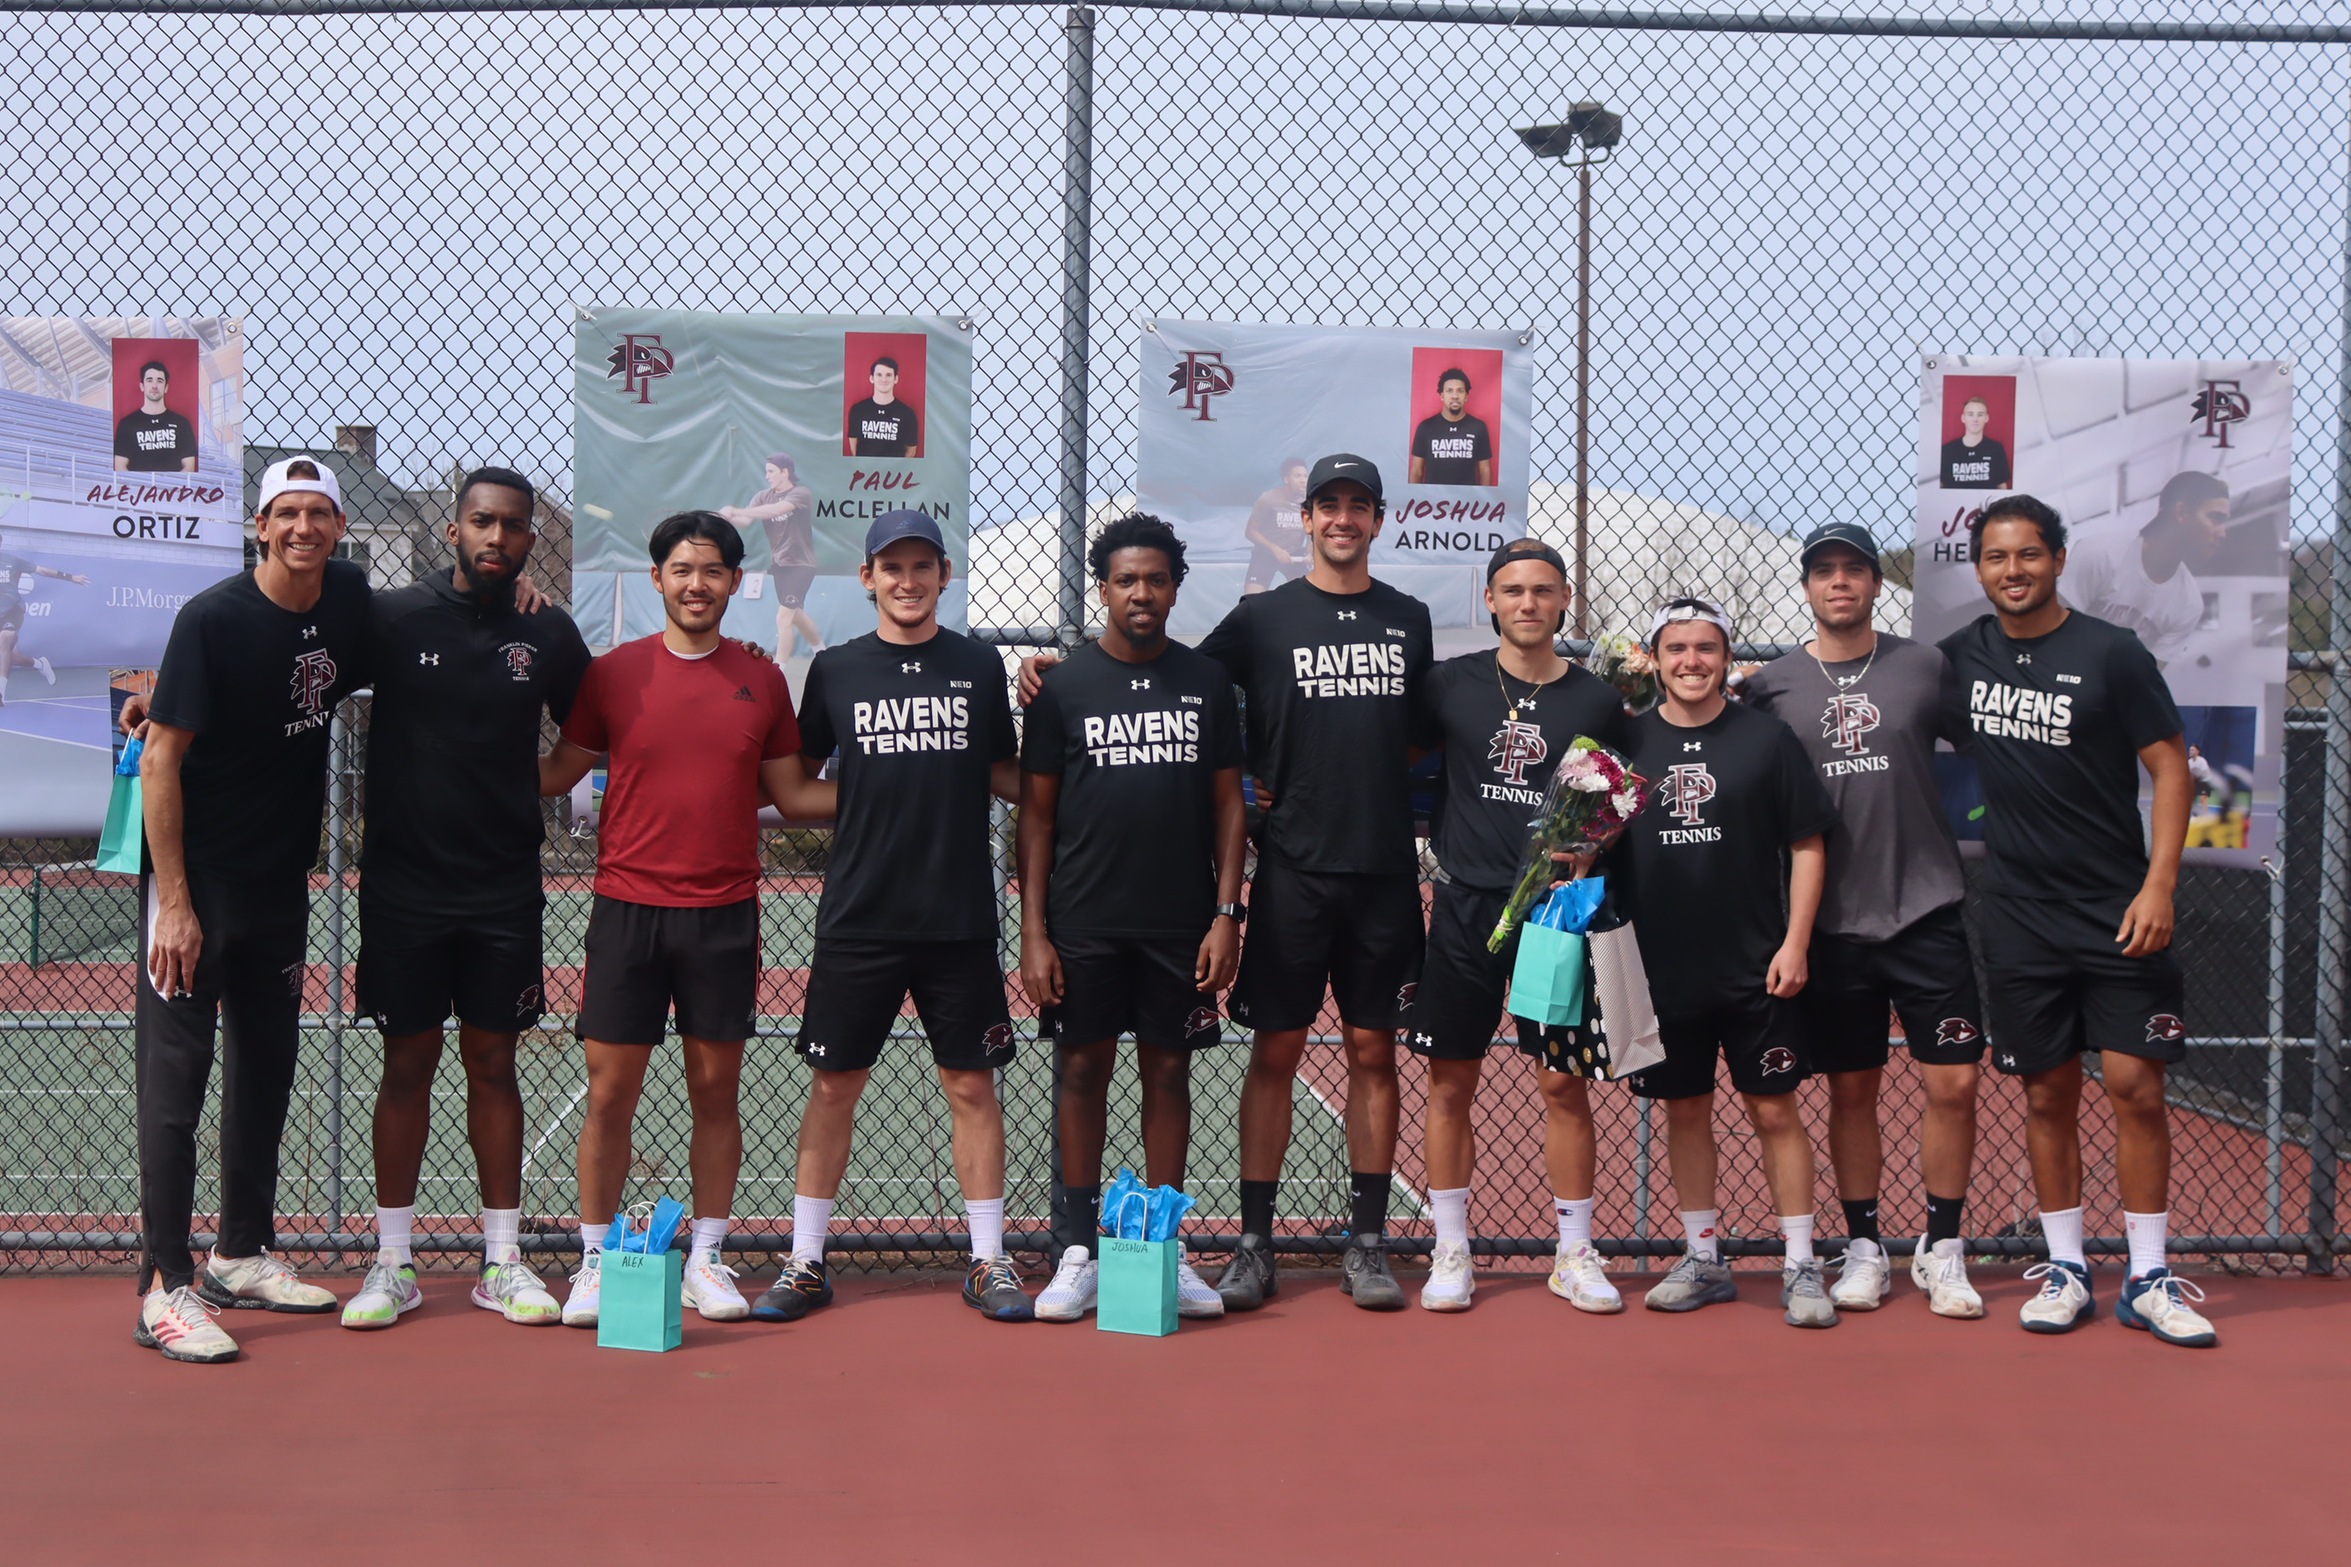 Men's Tennis Celebrates Senior Day, Earns First Win of Spring over Assumption, 6-1